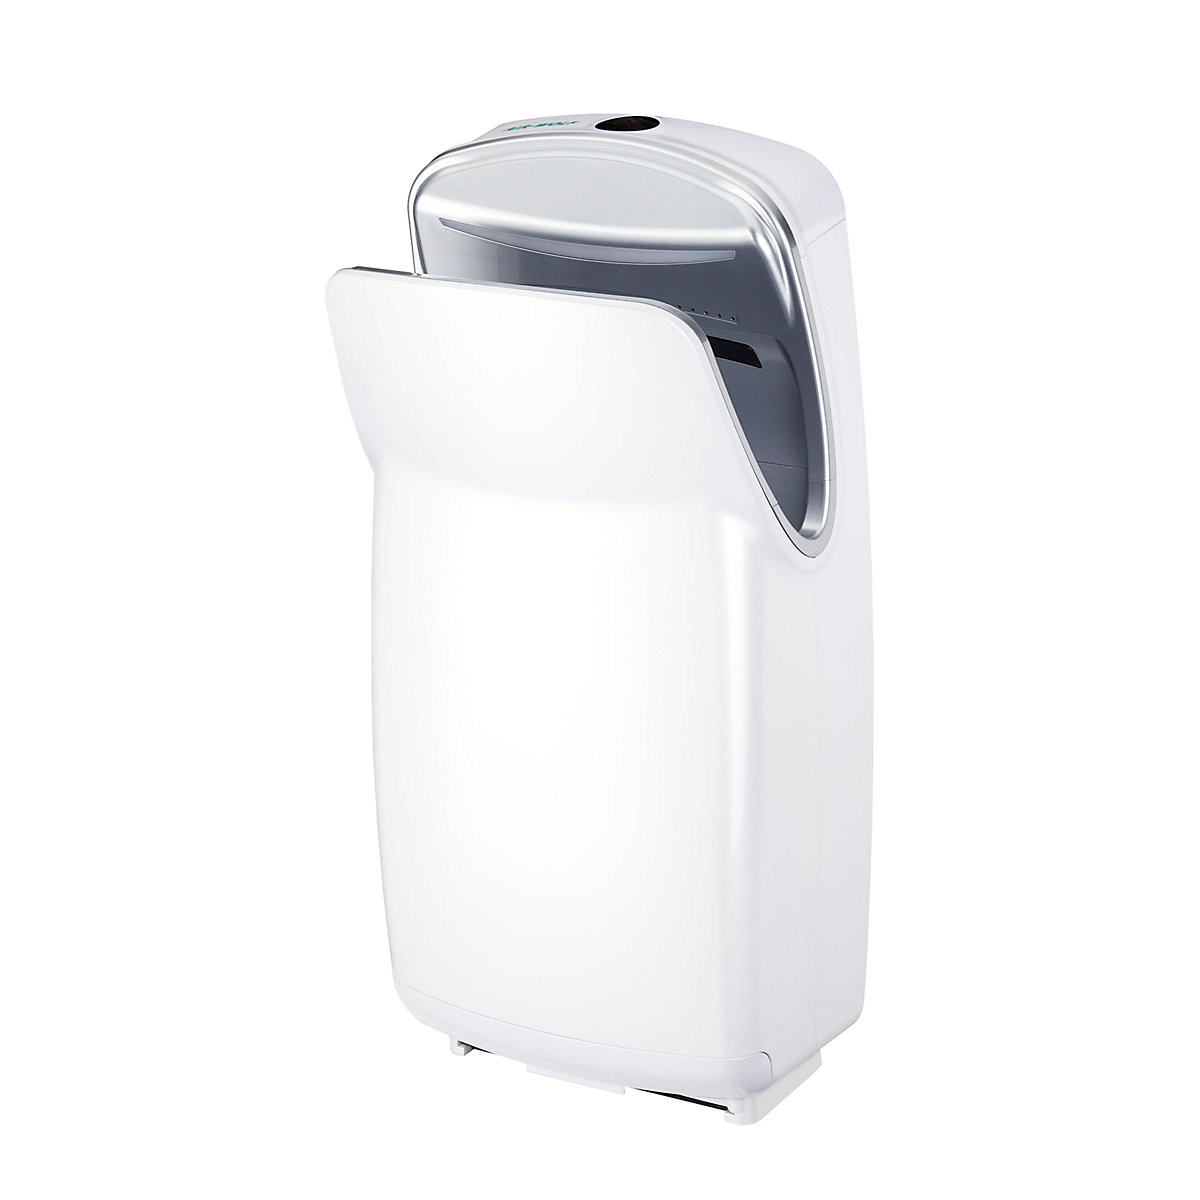 Hand dryer with infrared sensor – AIR-WOLF